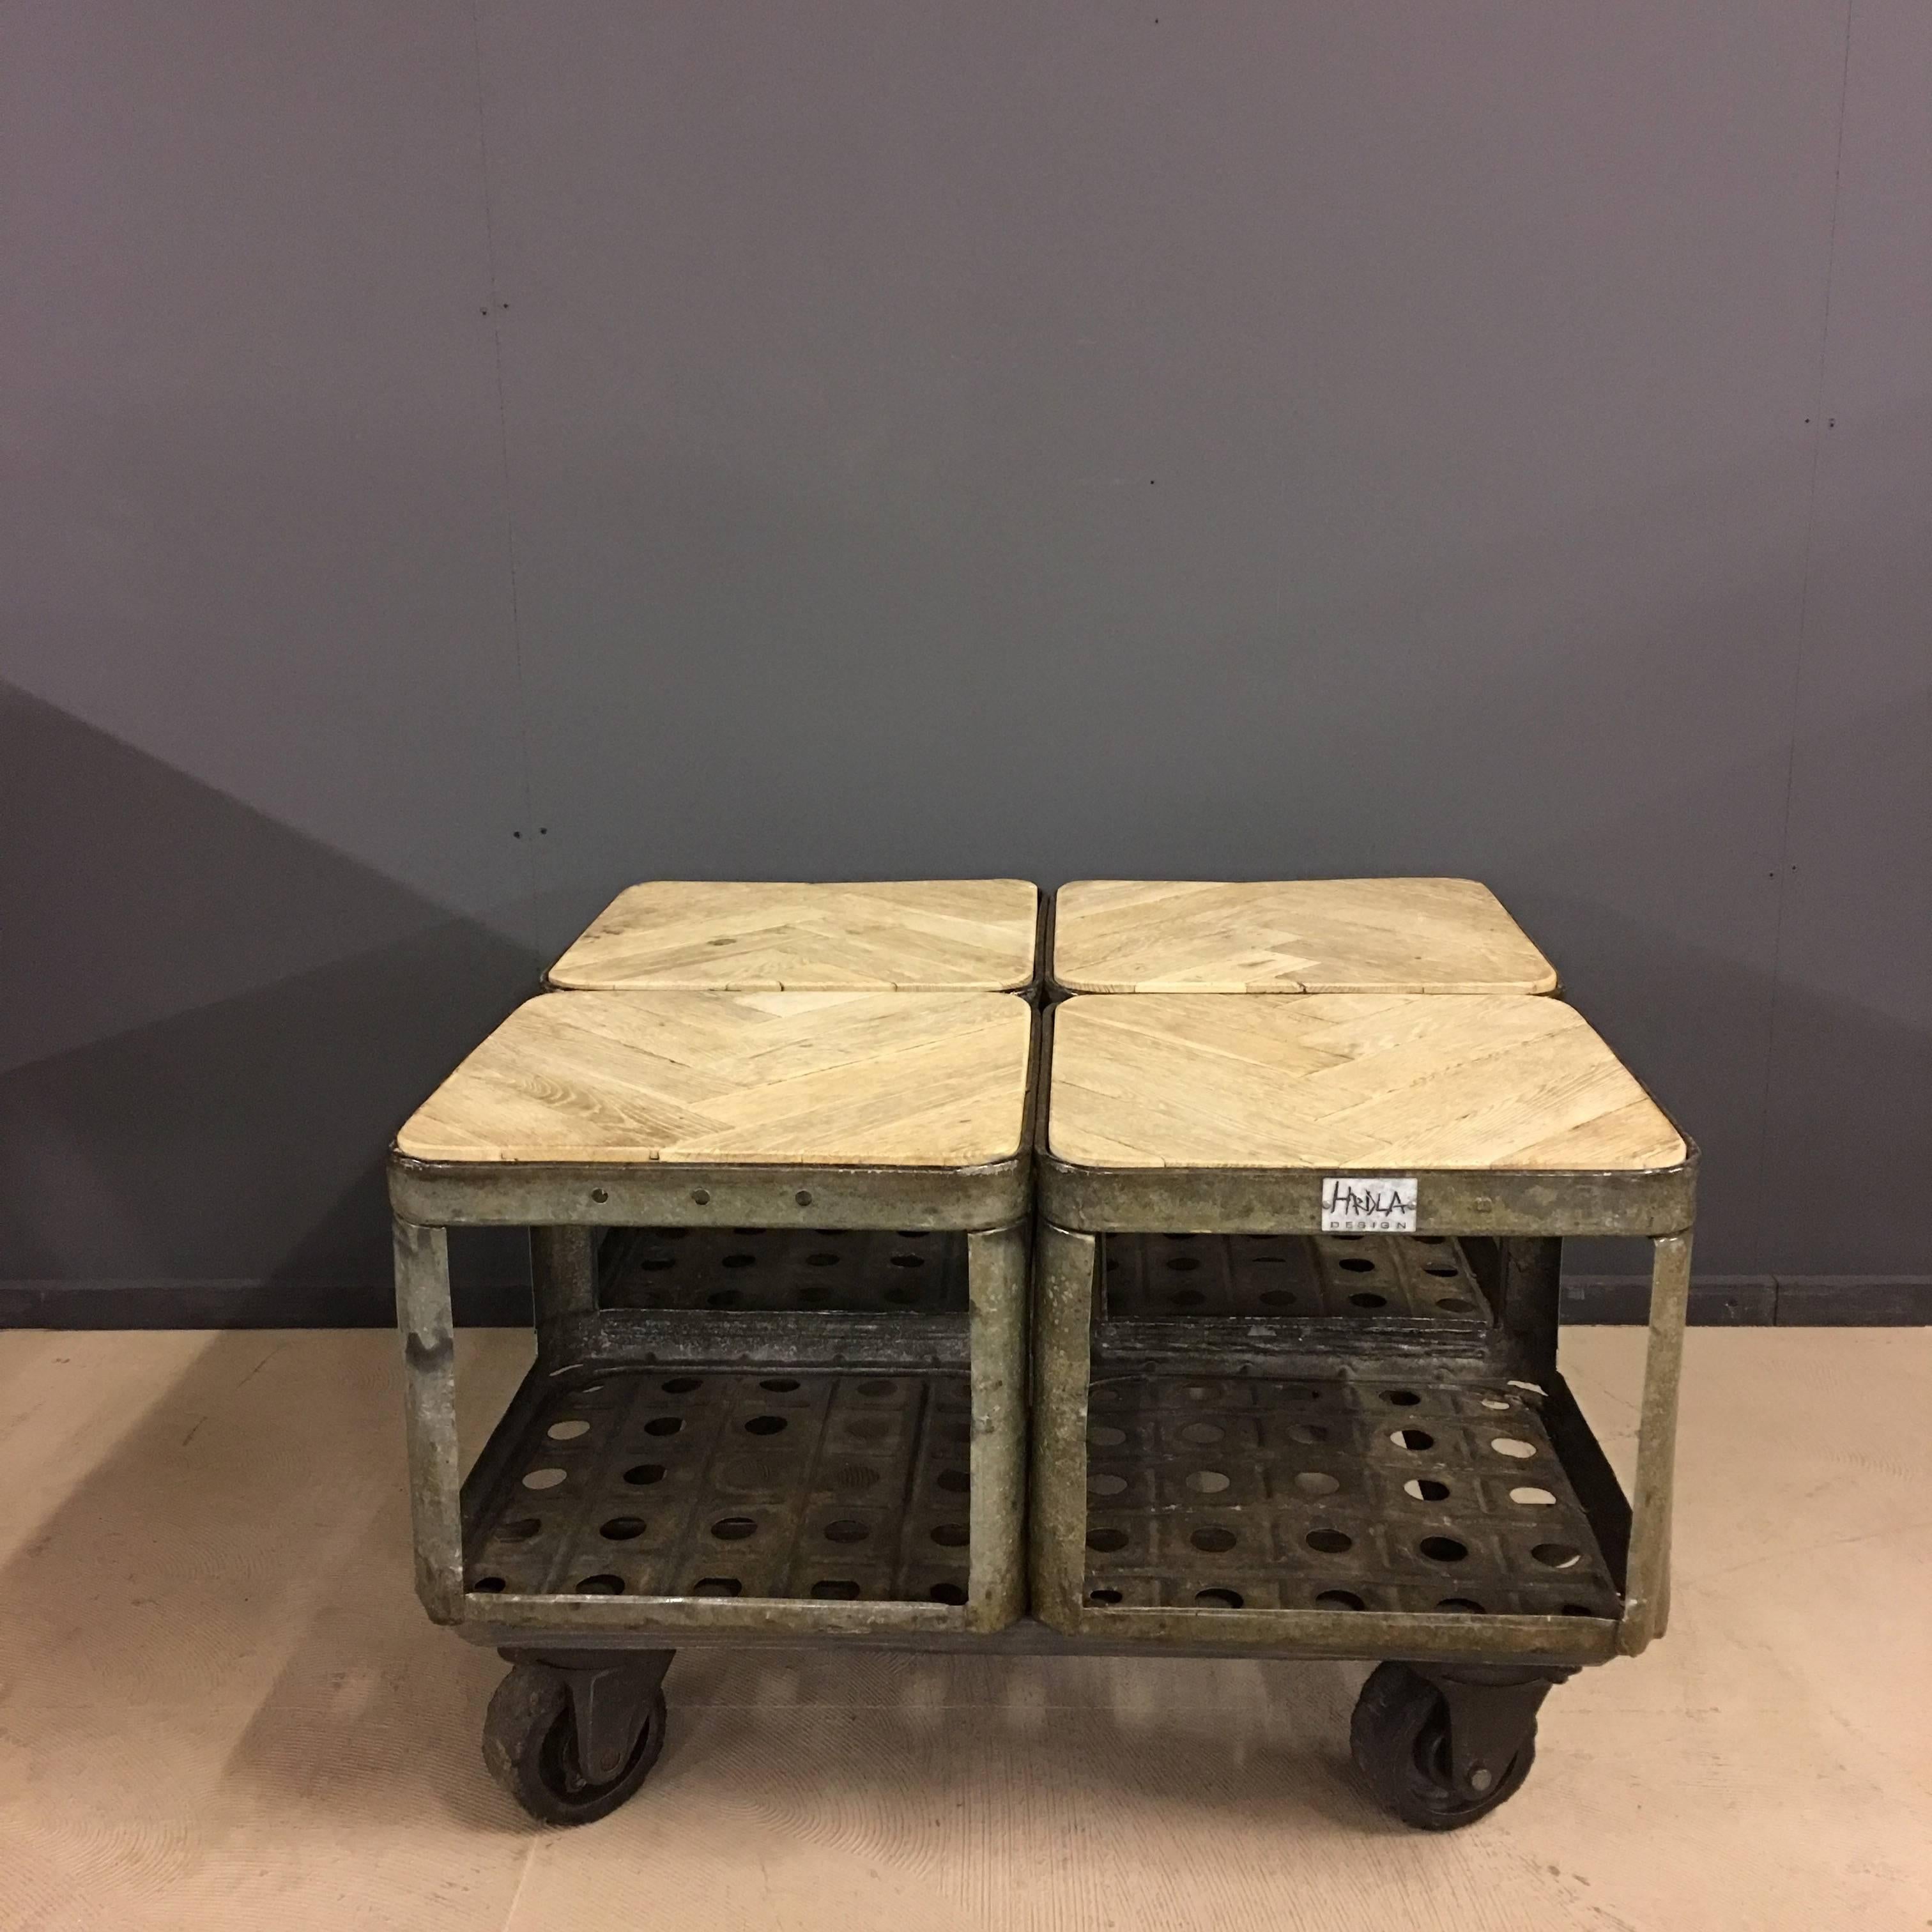 Square Industrial coffee table by Hrdla Design. Made of vintage Zinc crates and old oak.